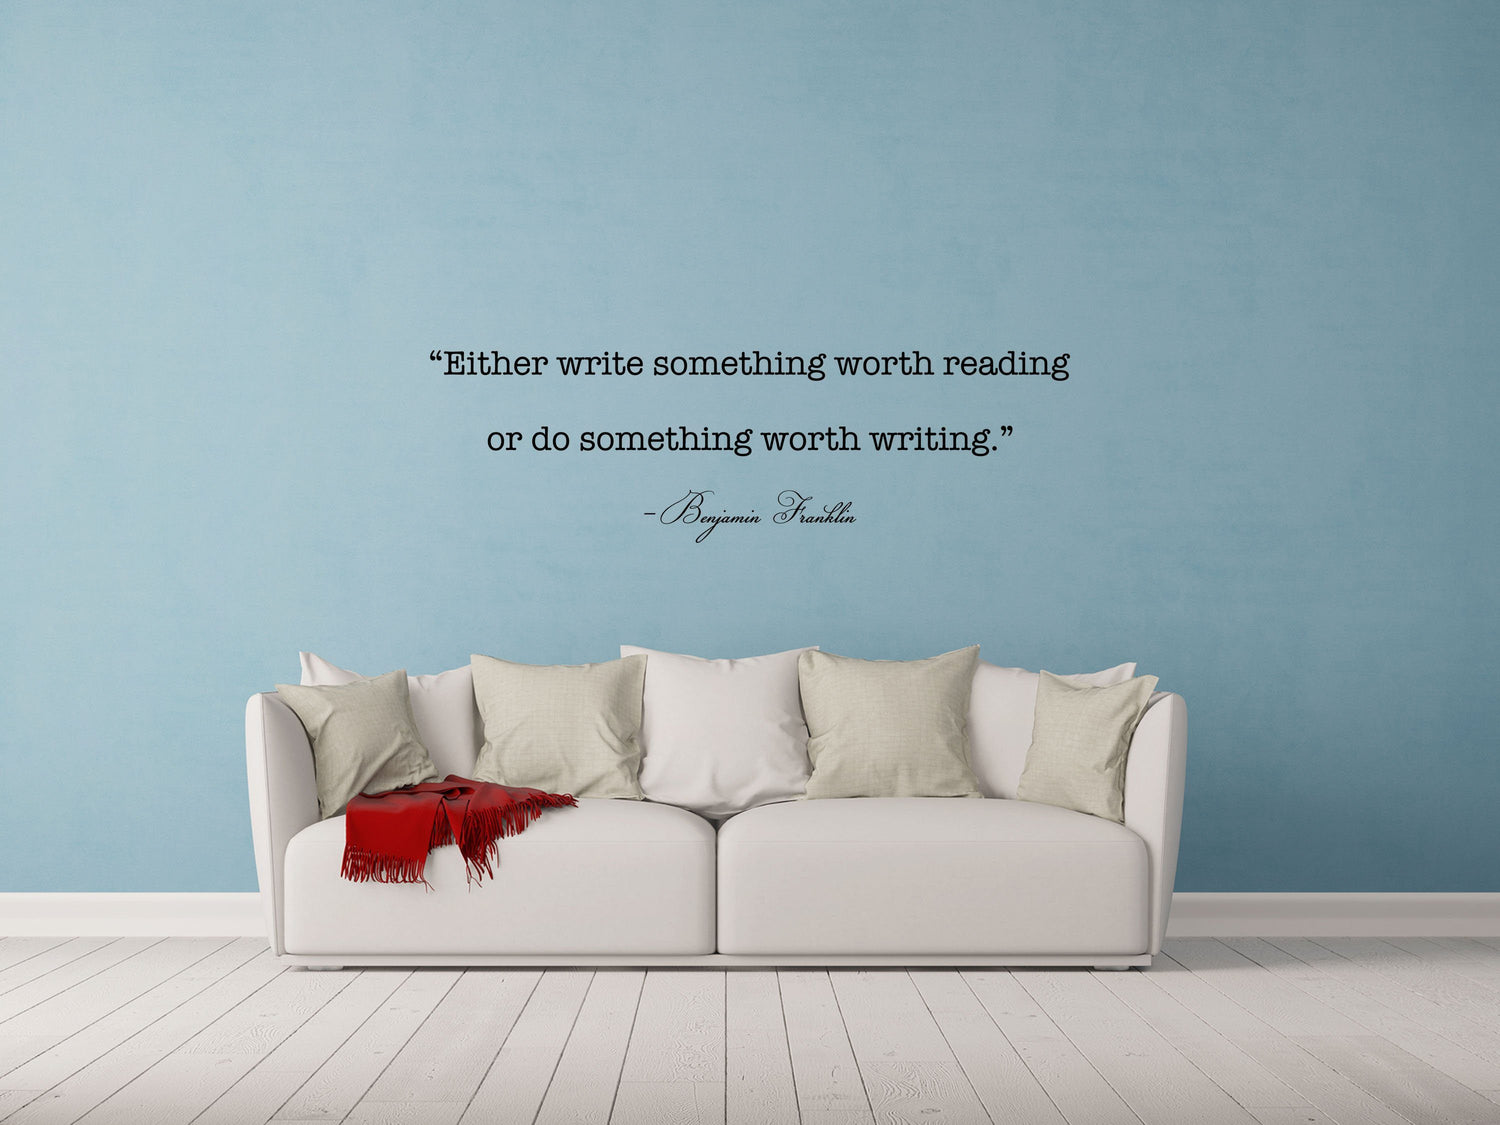 Either Write Something Worth Reading - Inspirational Wall Decals Vinyl Wall Decal Inspirational Wall Signs 